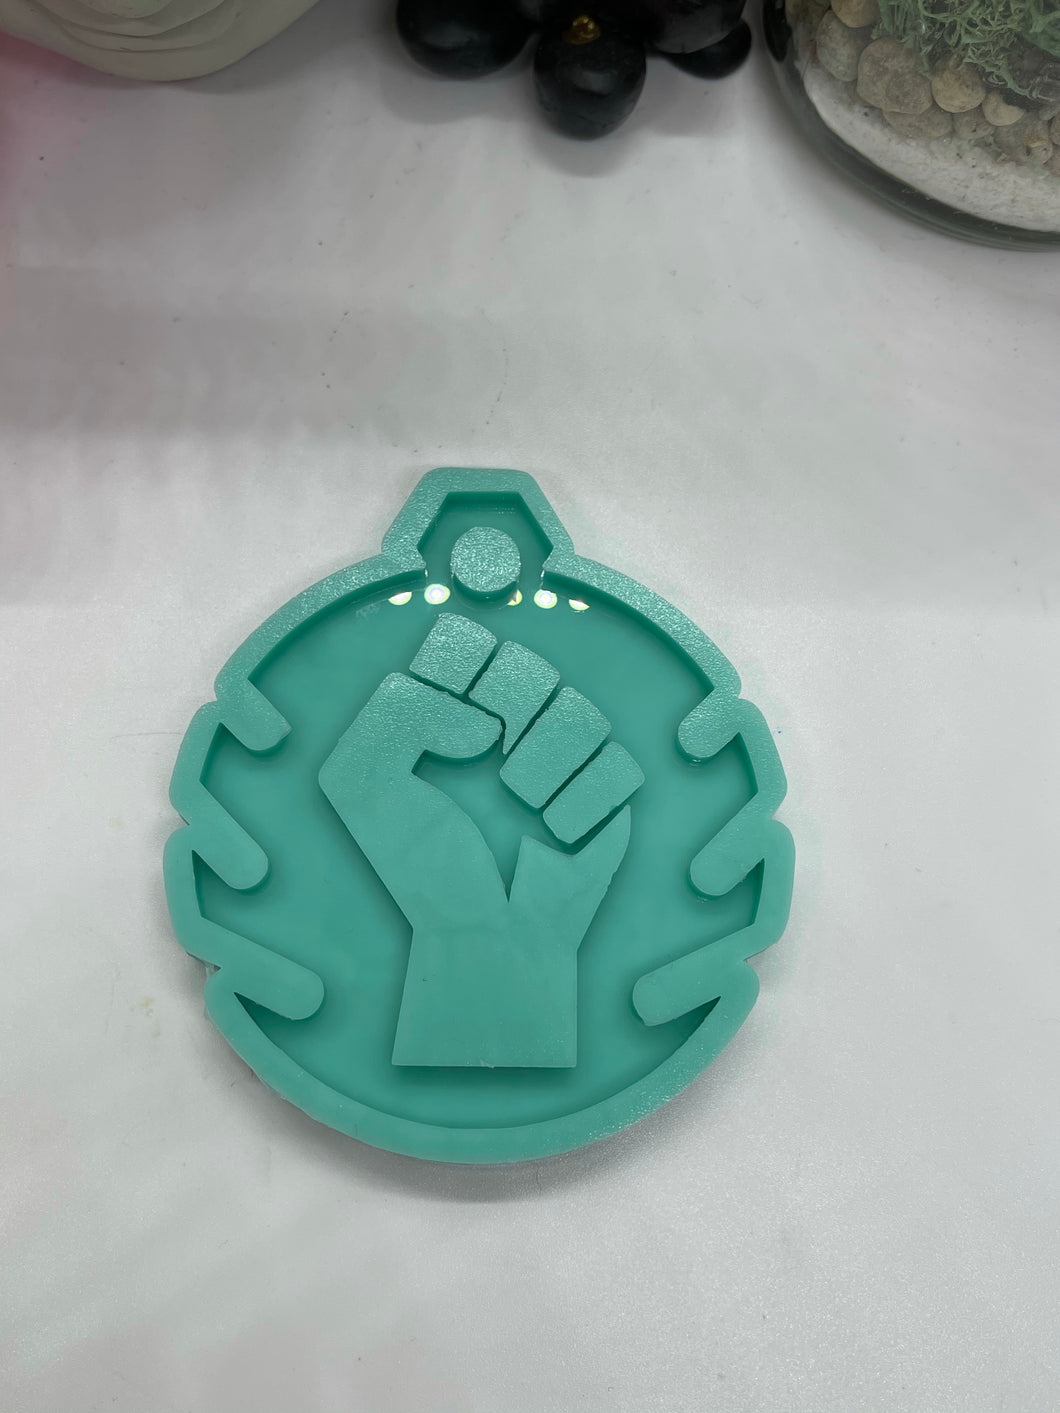 BLM Fist Mask Holder Silicone Mold